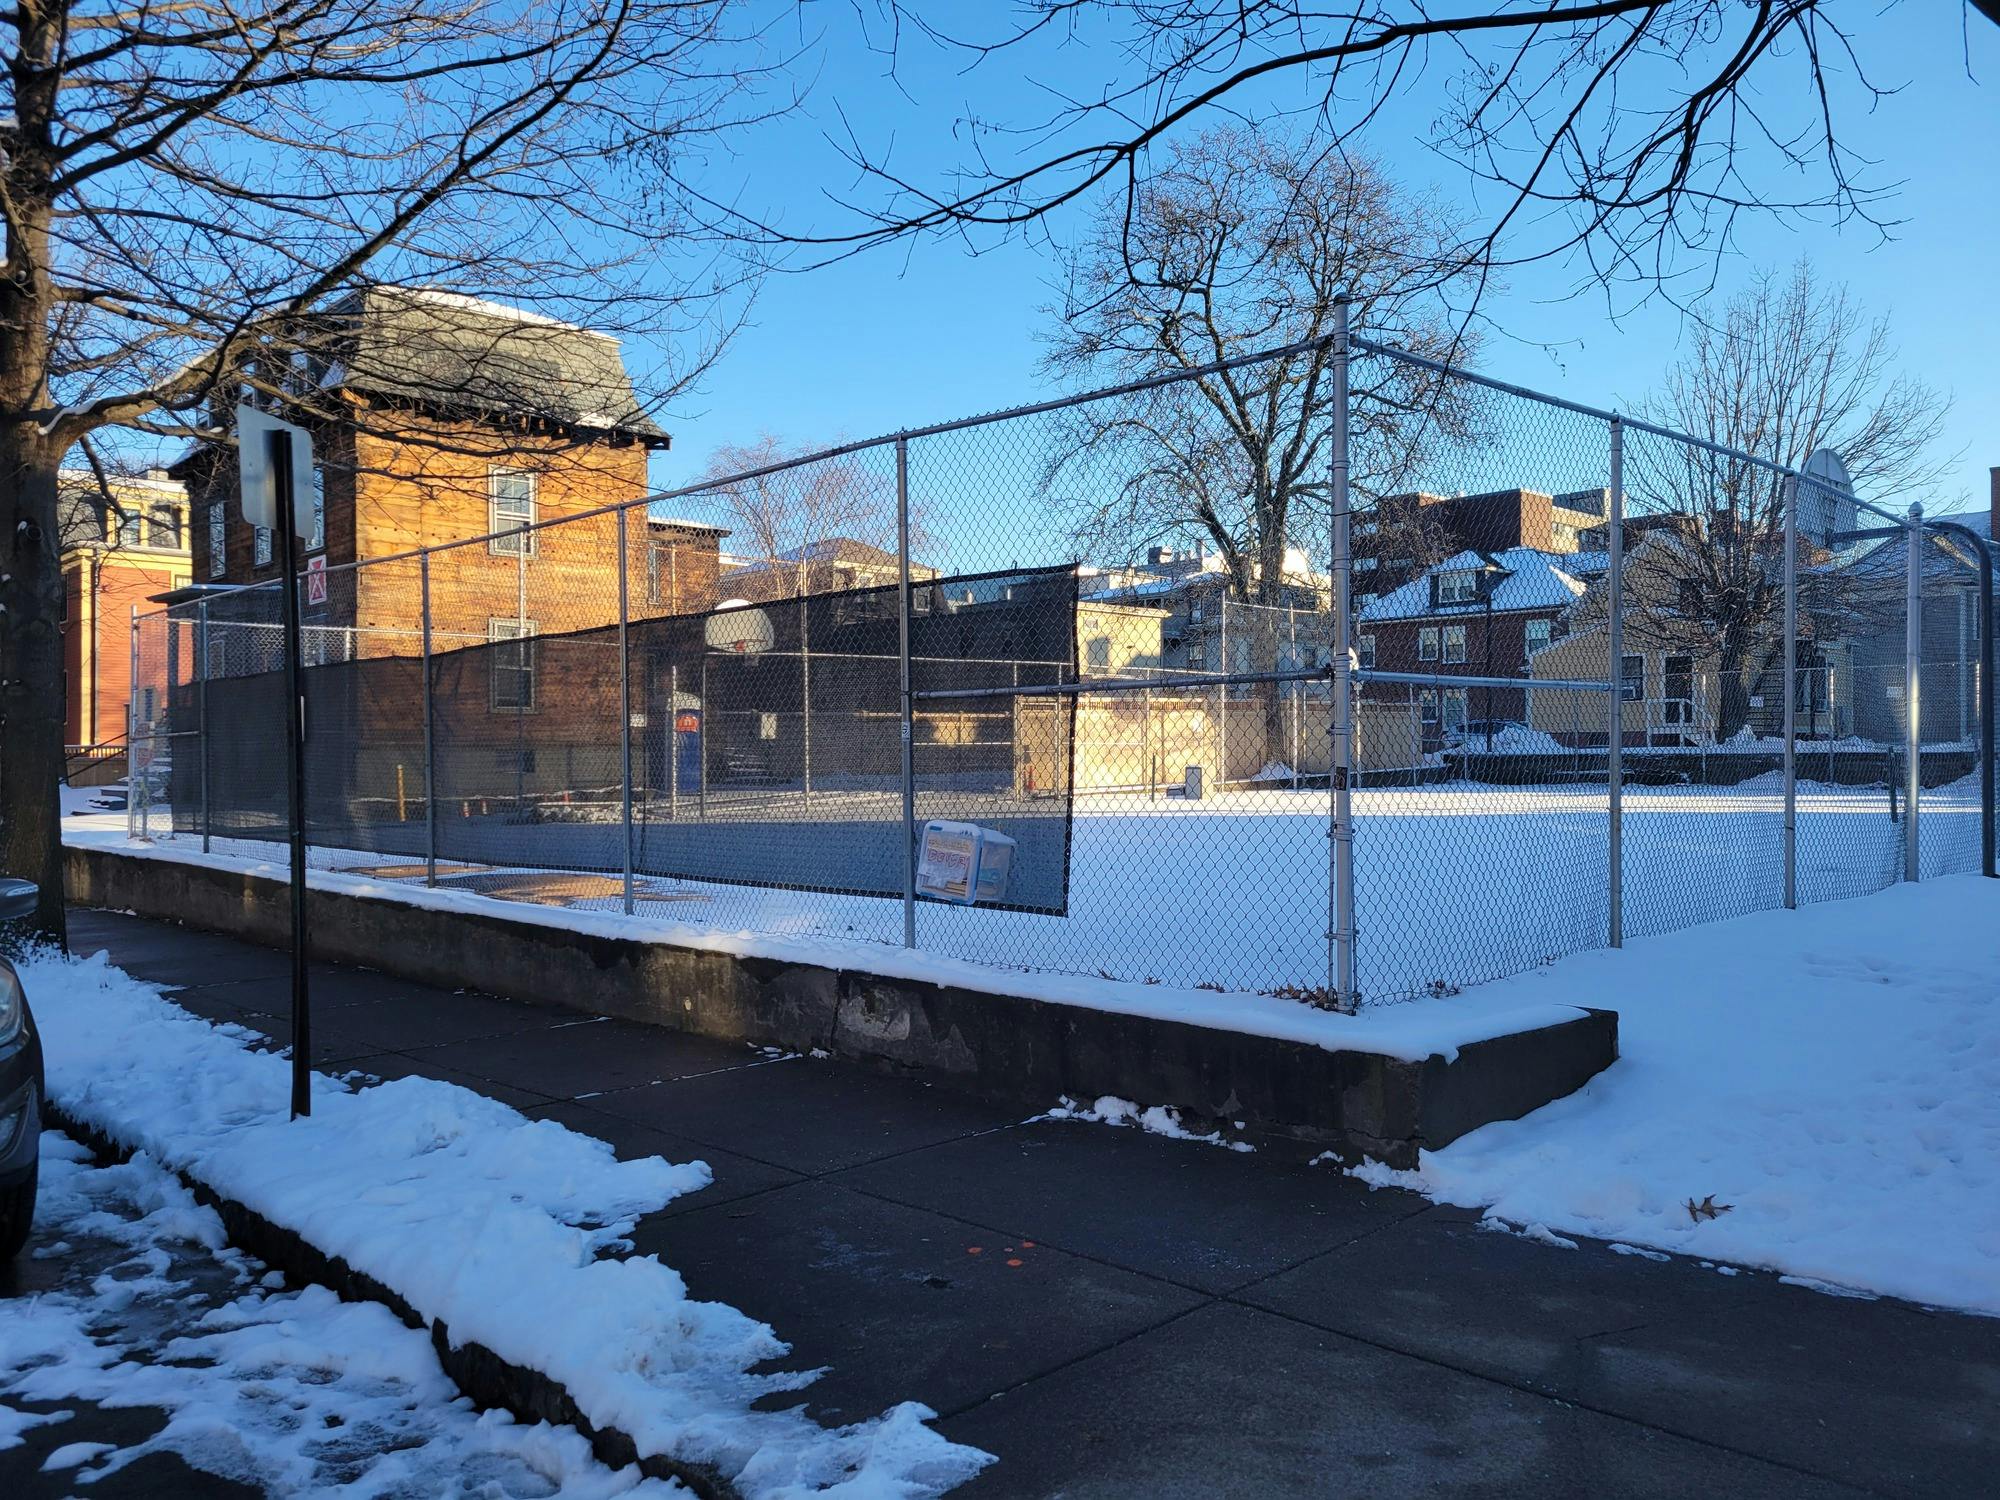 30 Wendell Street Site with snow on tennis court